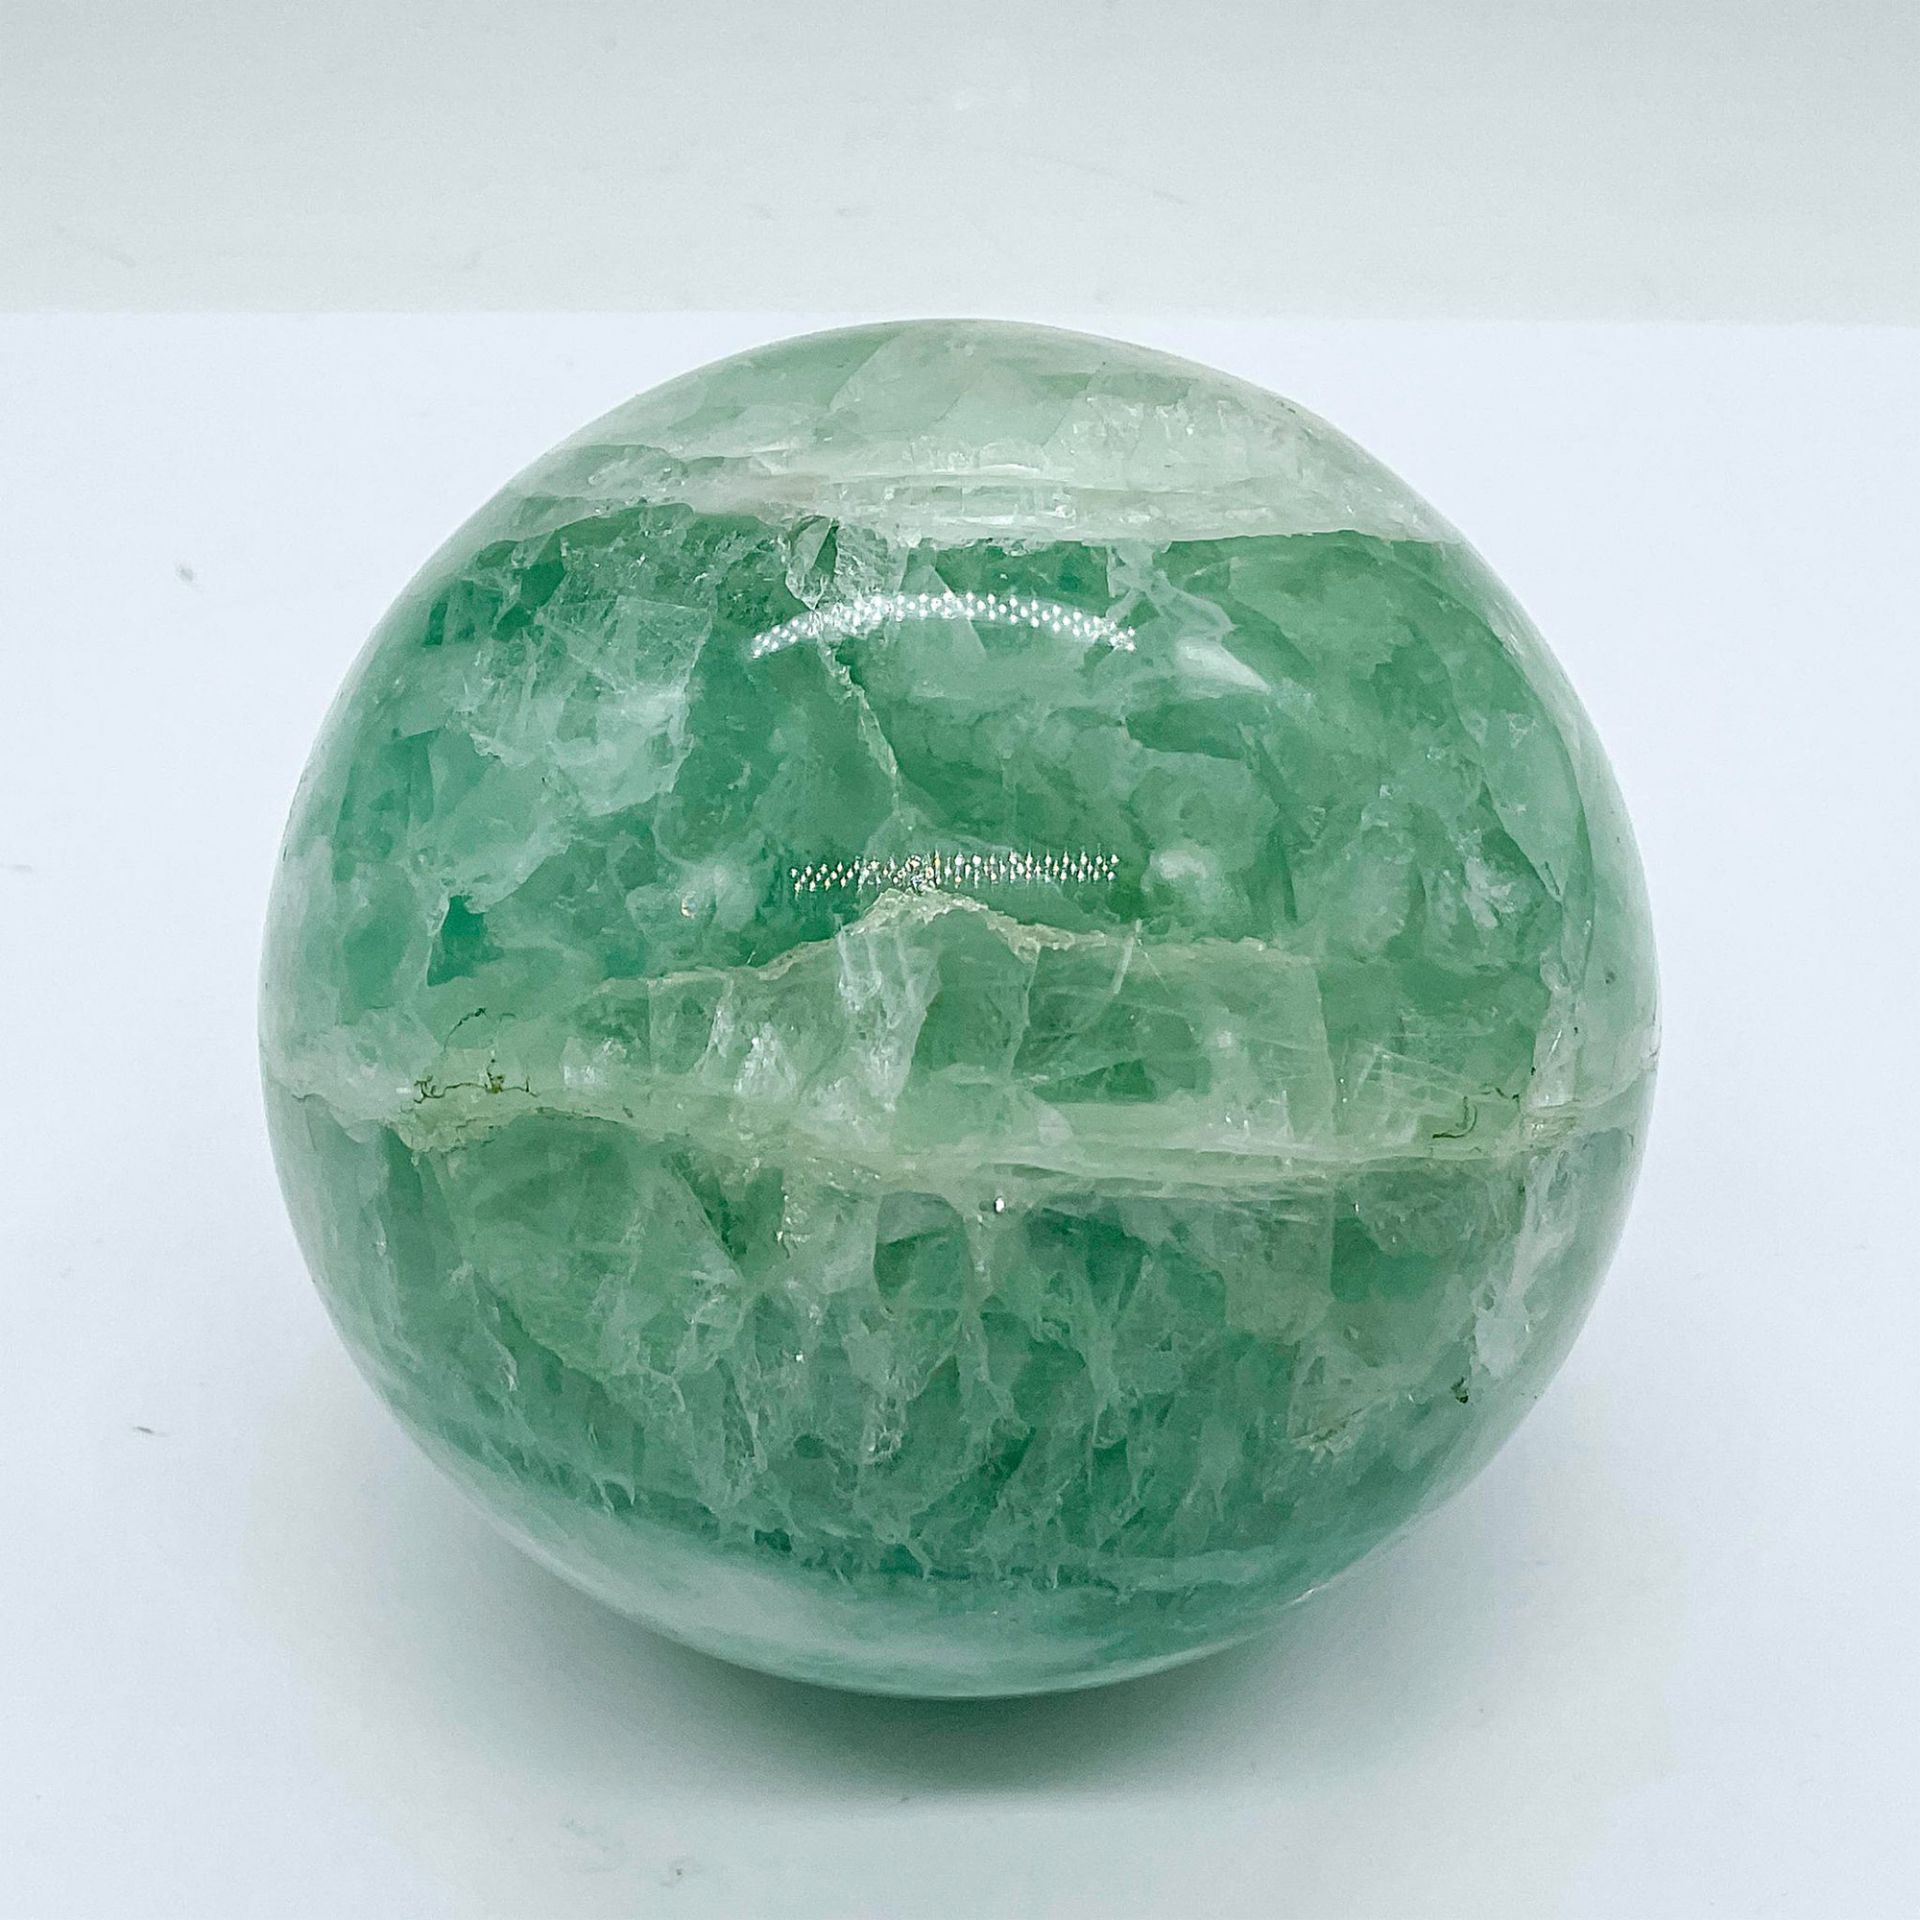 Polished Green Fluorite Orb - Image 2 of 2